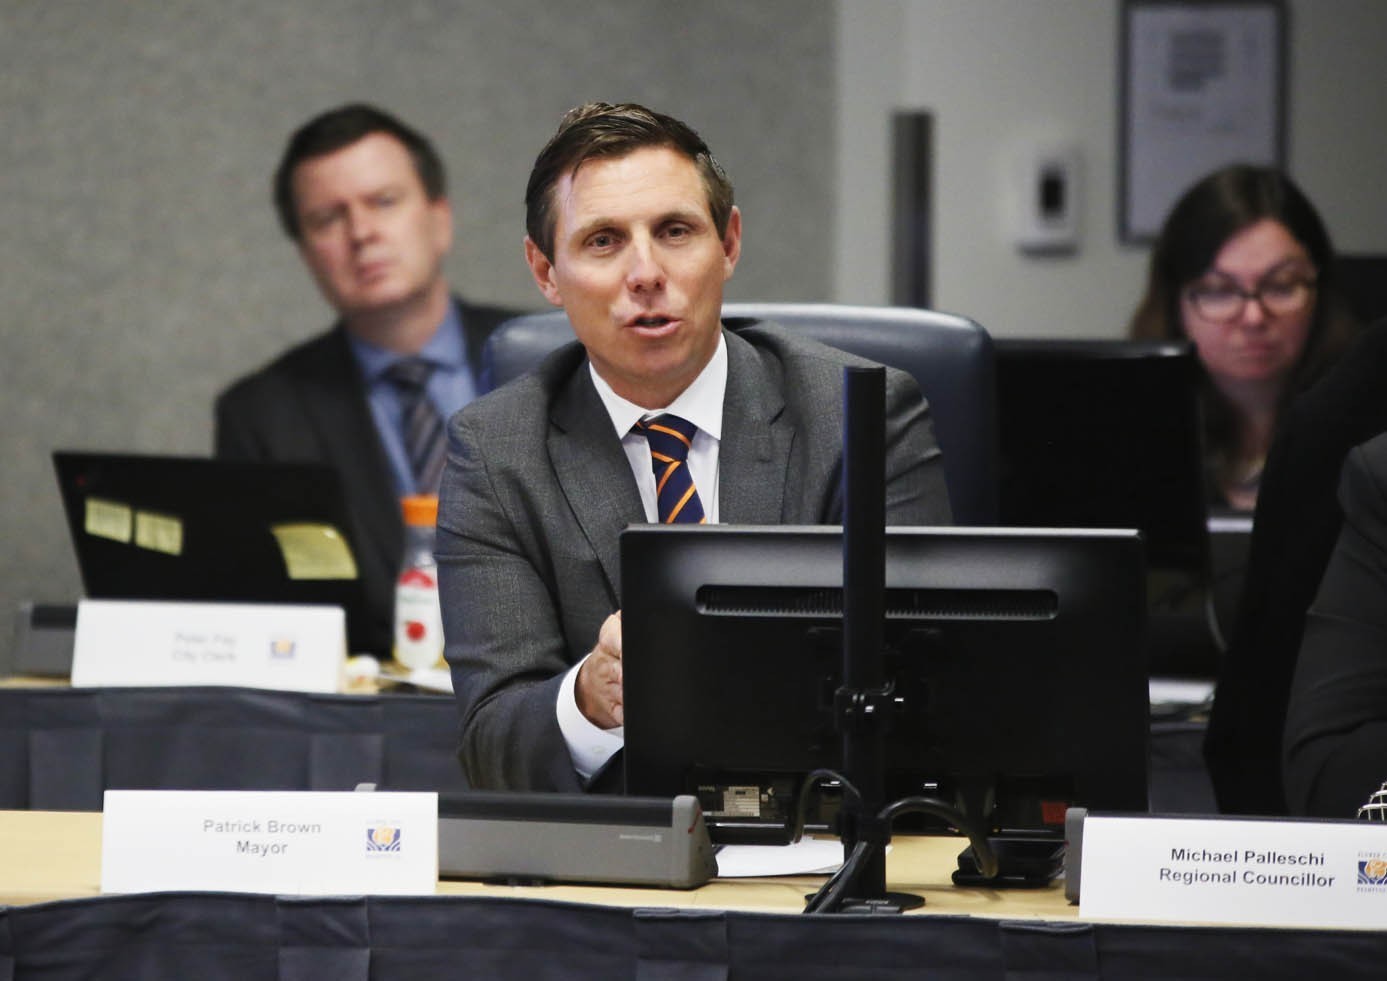 Report shows City Hall investigation was closing in on Patrick Brown when he cancelled the probe